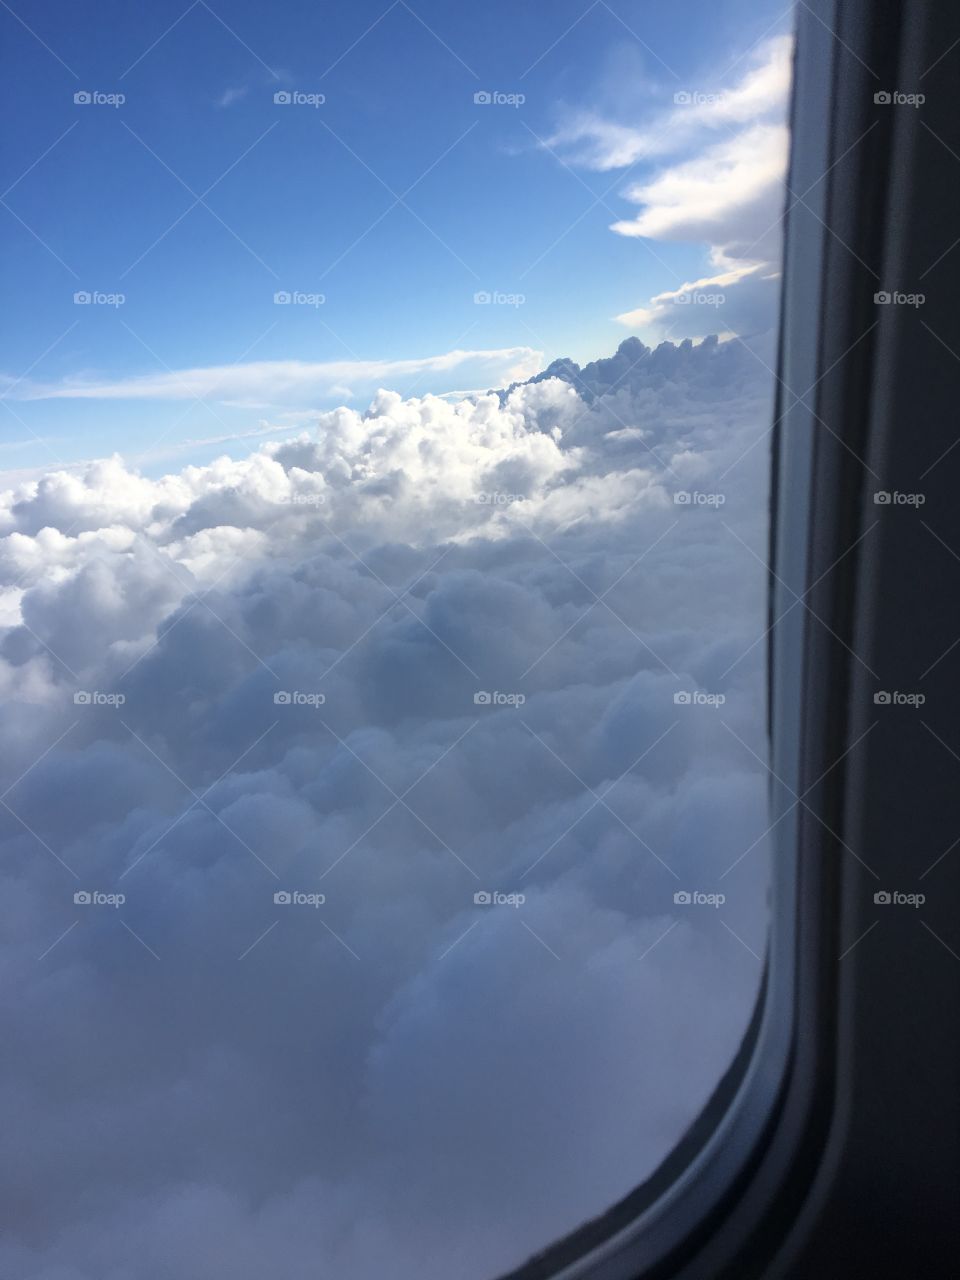 Cool looking clouds outside my plane window